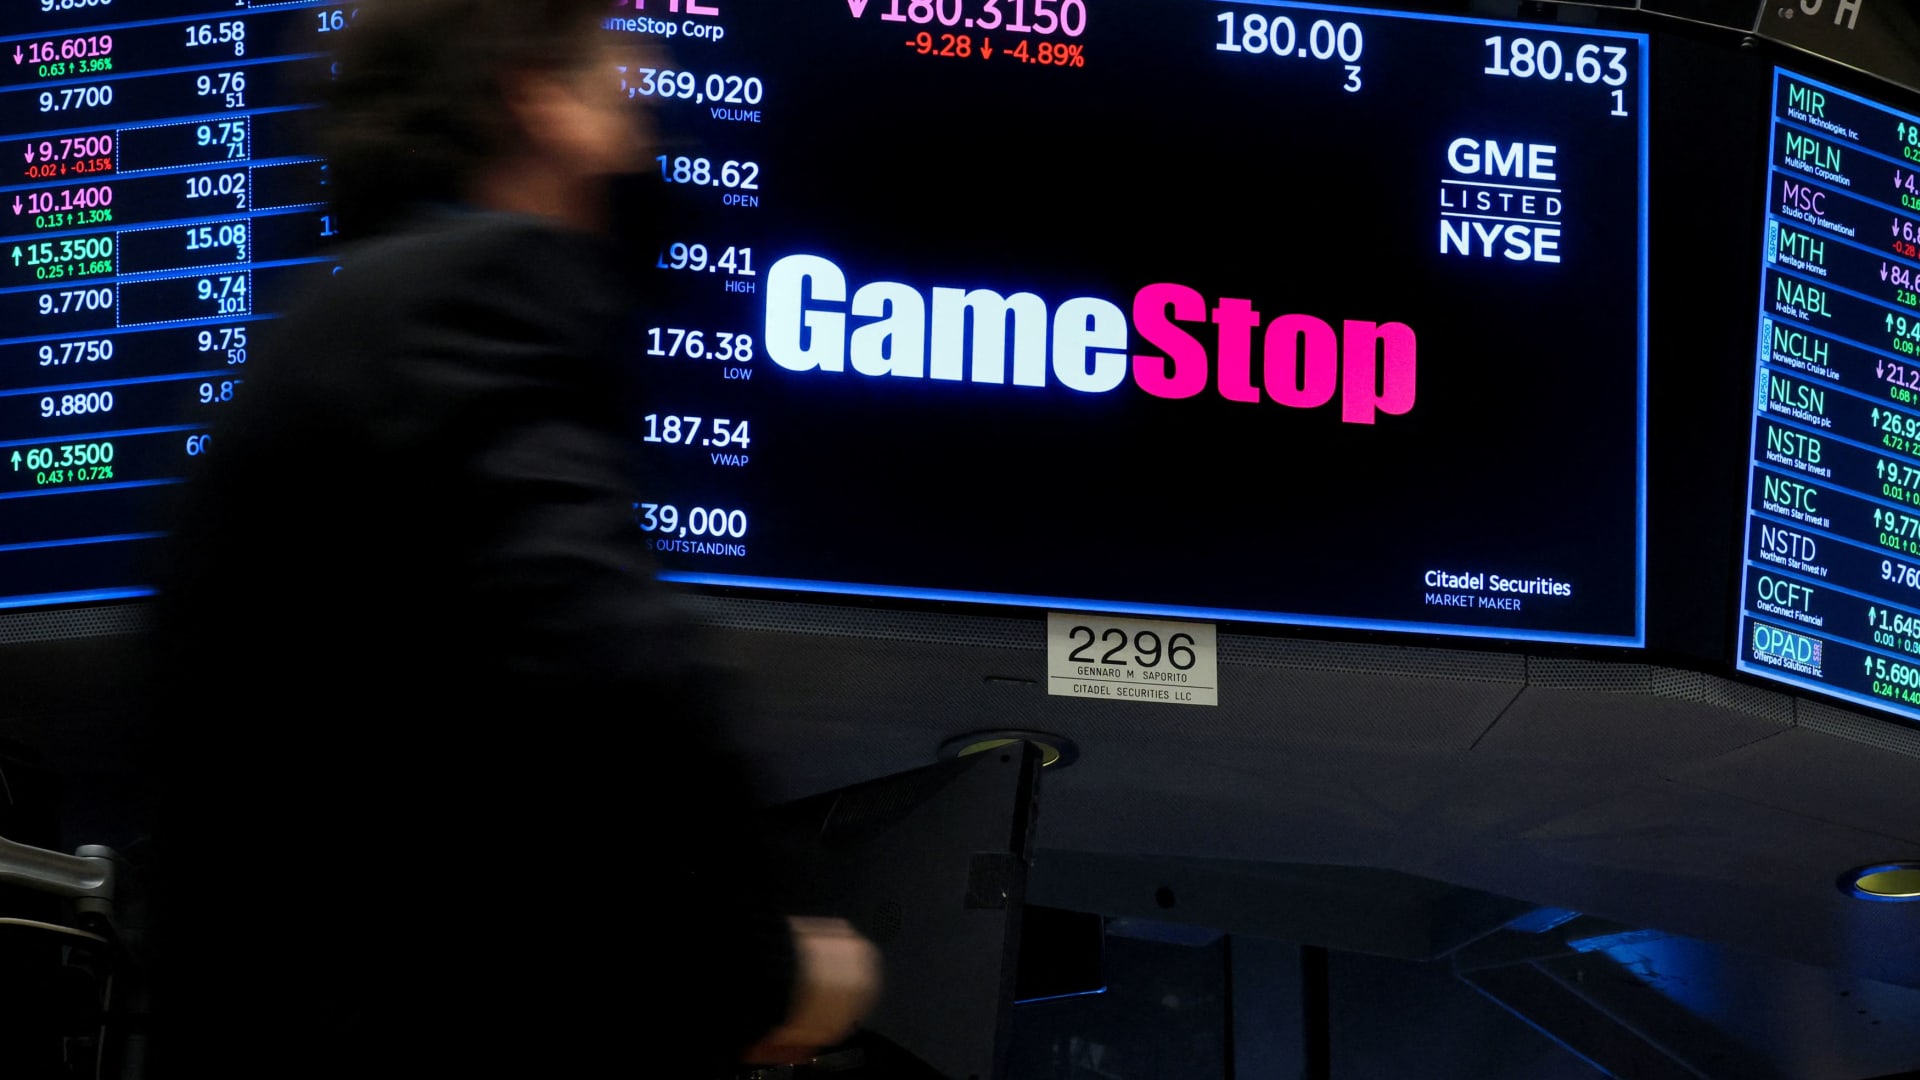 Stocks making the biggest moves midday: GameStop, Uber, Nielsen Holdings and more